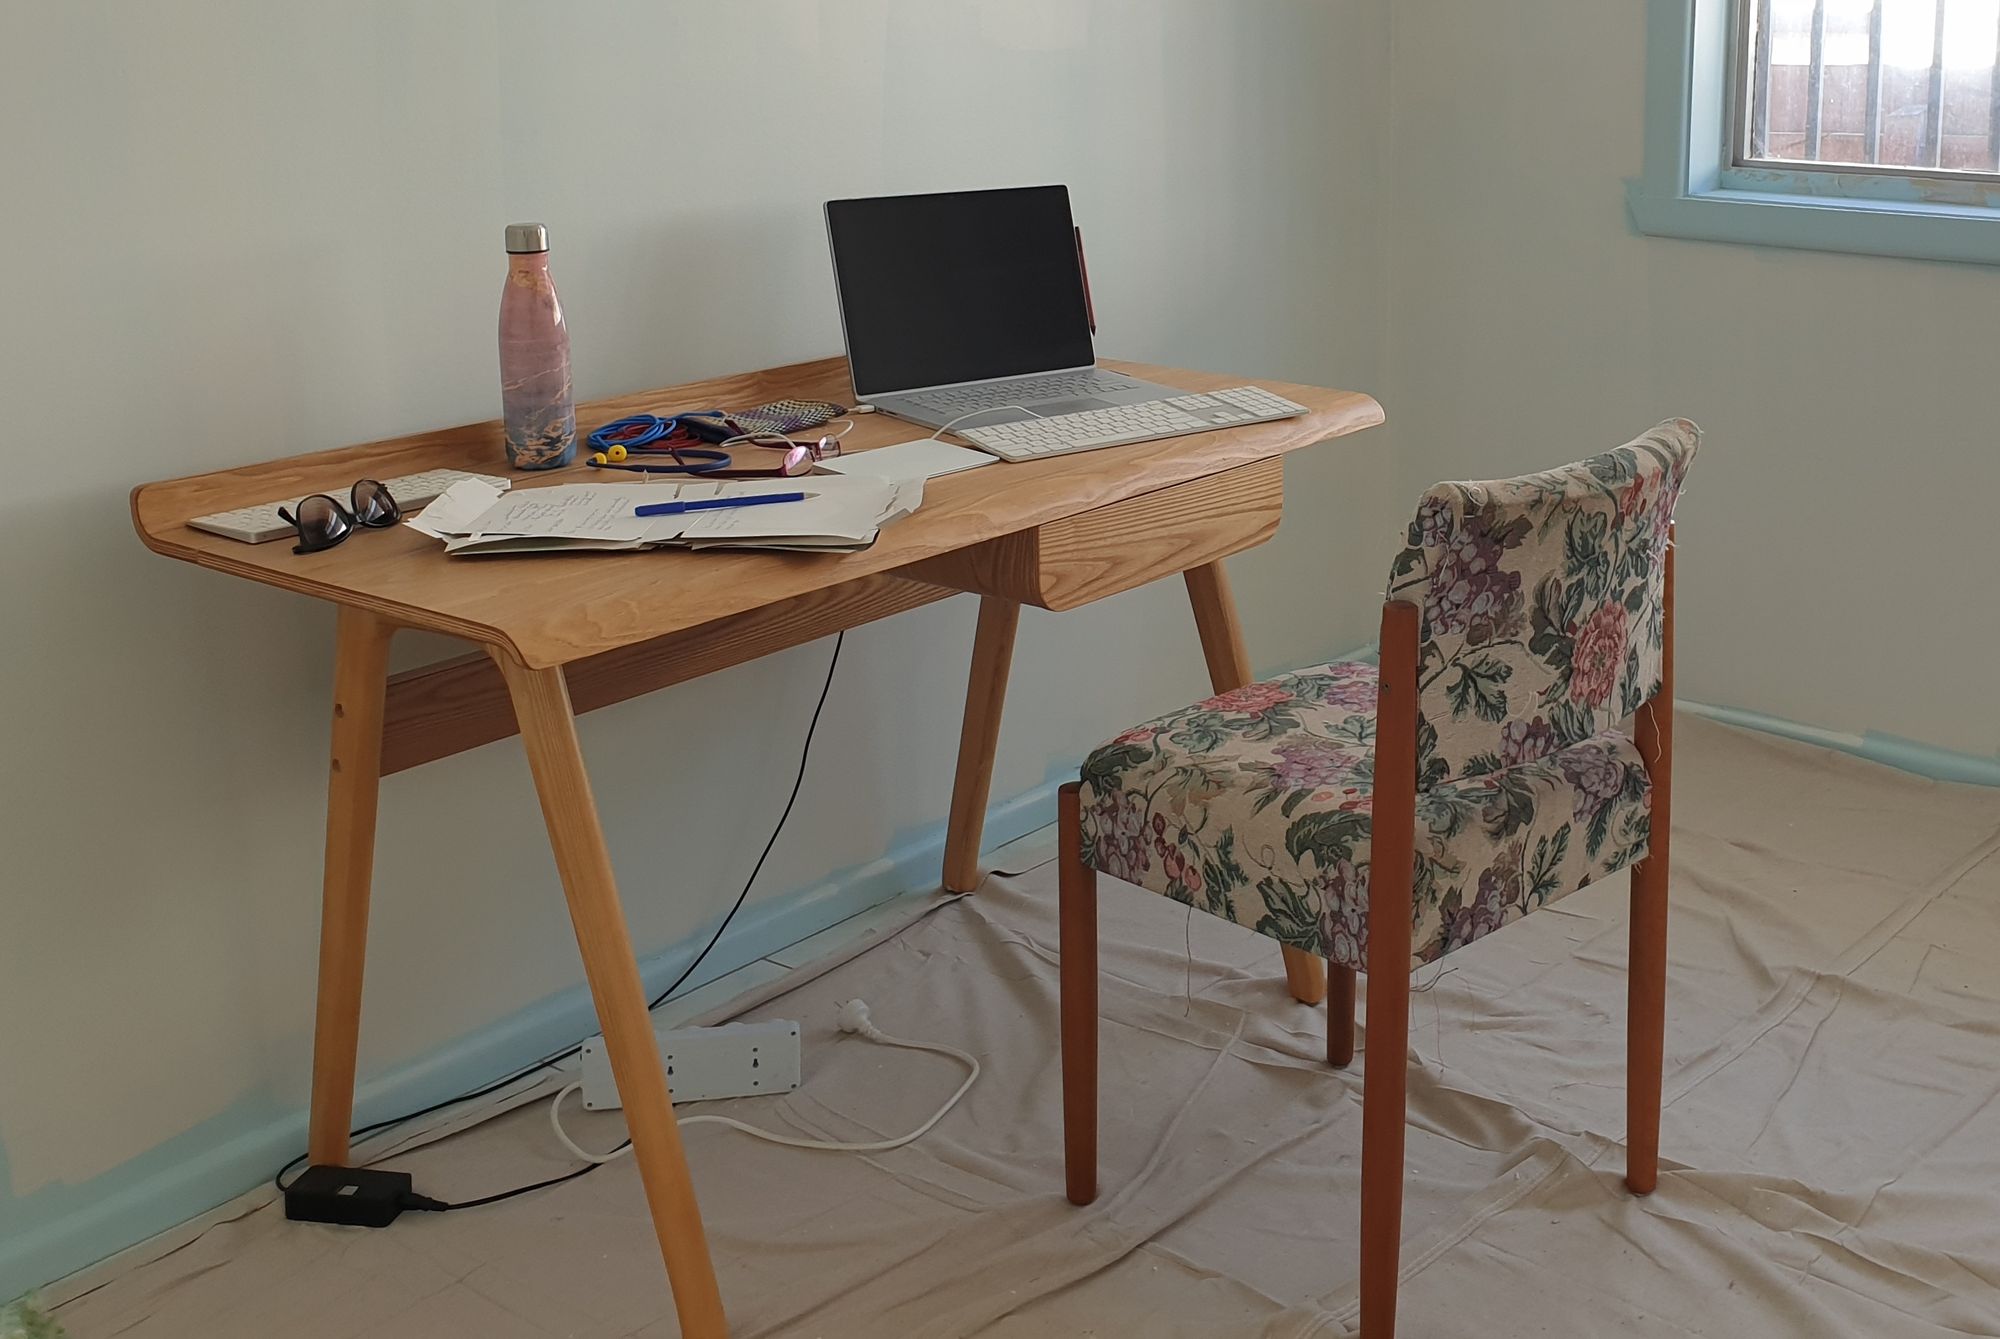 A desk with a laptop, flattened boxes and a pen